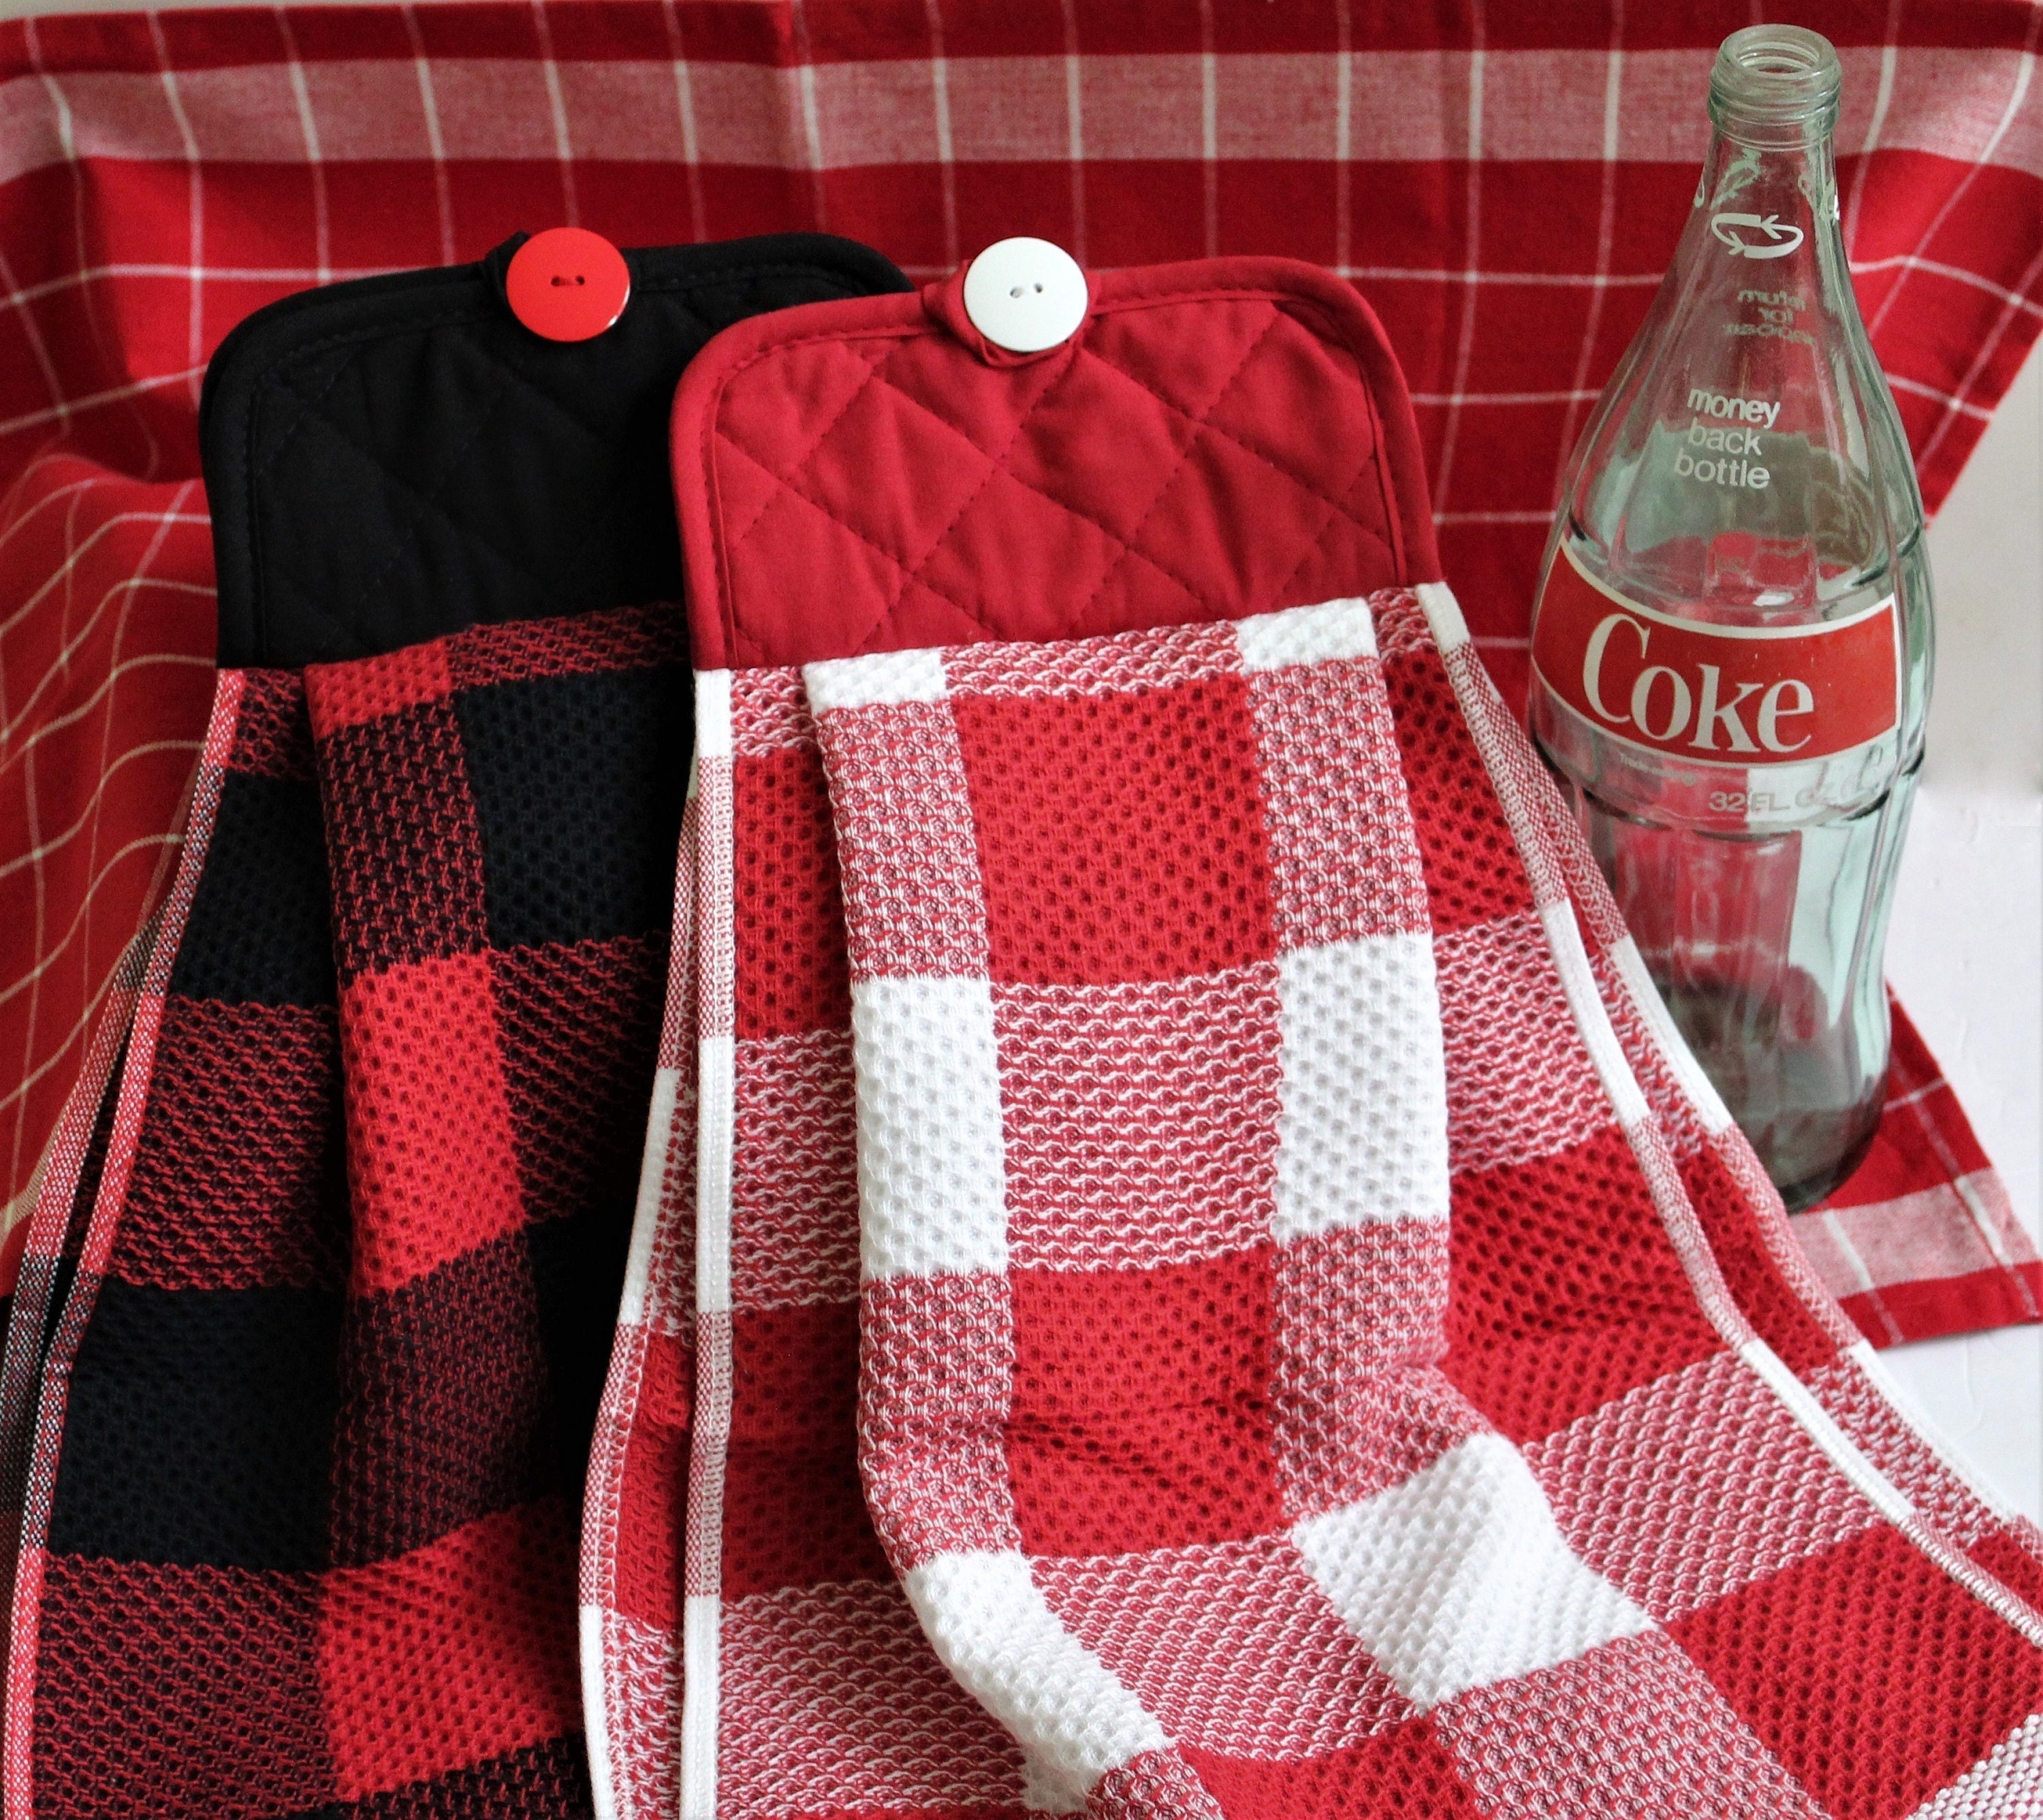 Red checked towel with fancy lace.